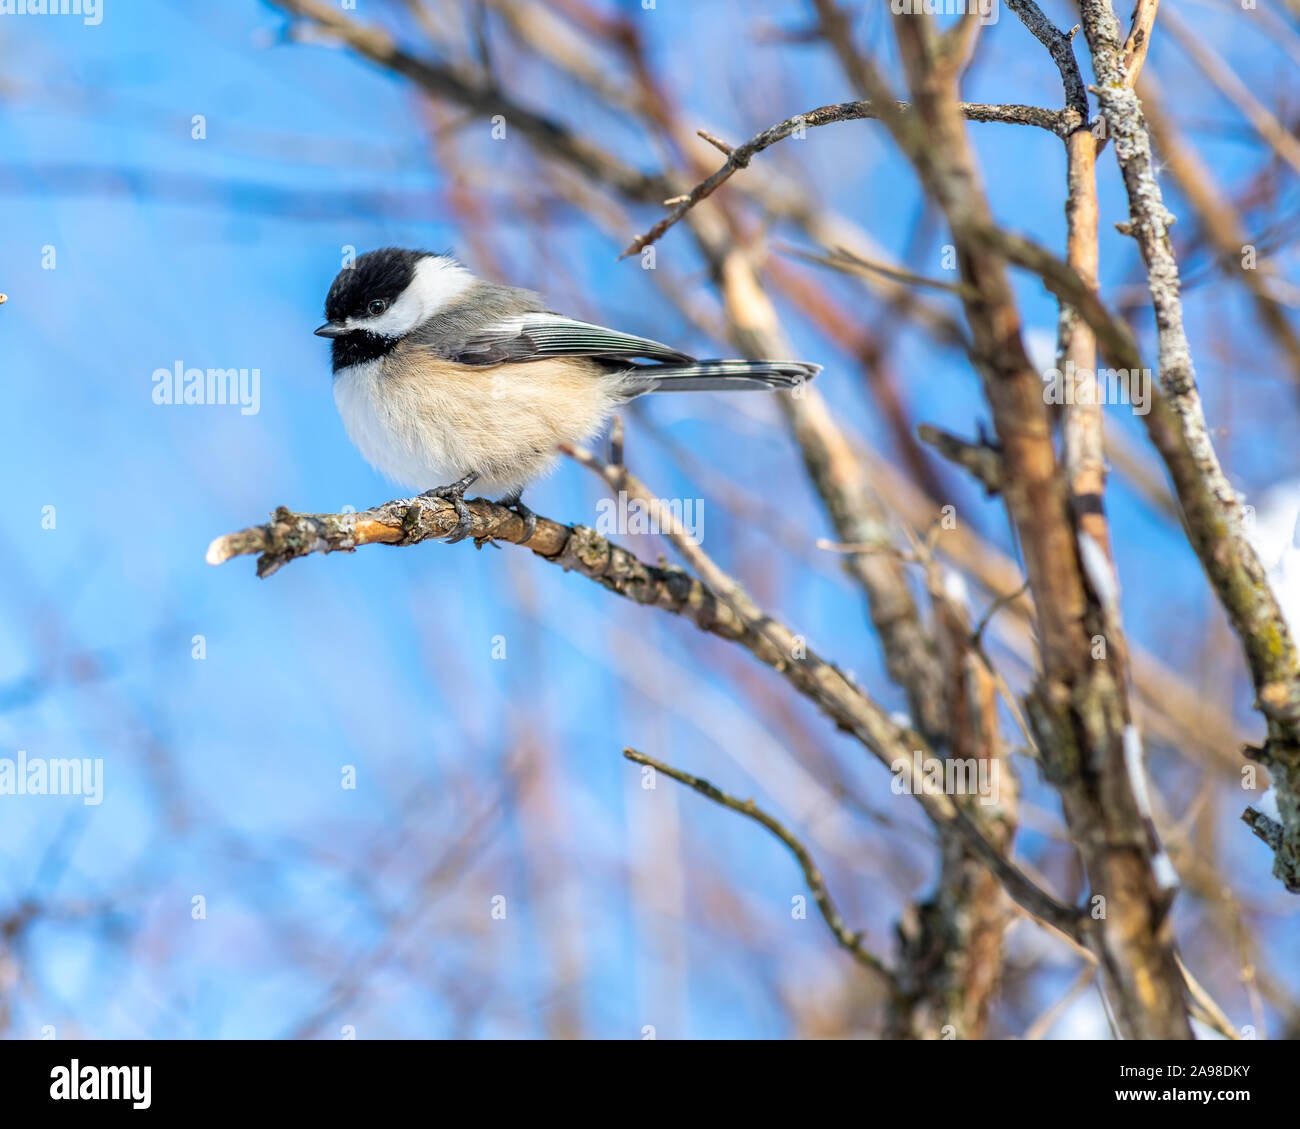 Closeup portrait of a Black-capped Chickadee (Poecile atricapillus) perched on a branch. Stock Photo